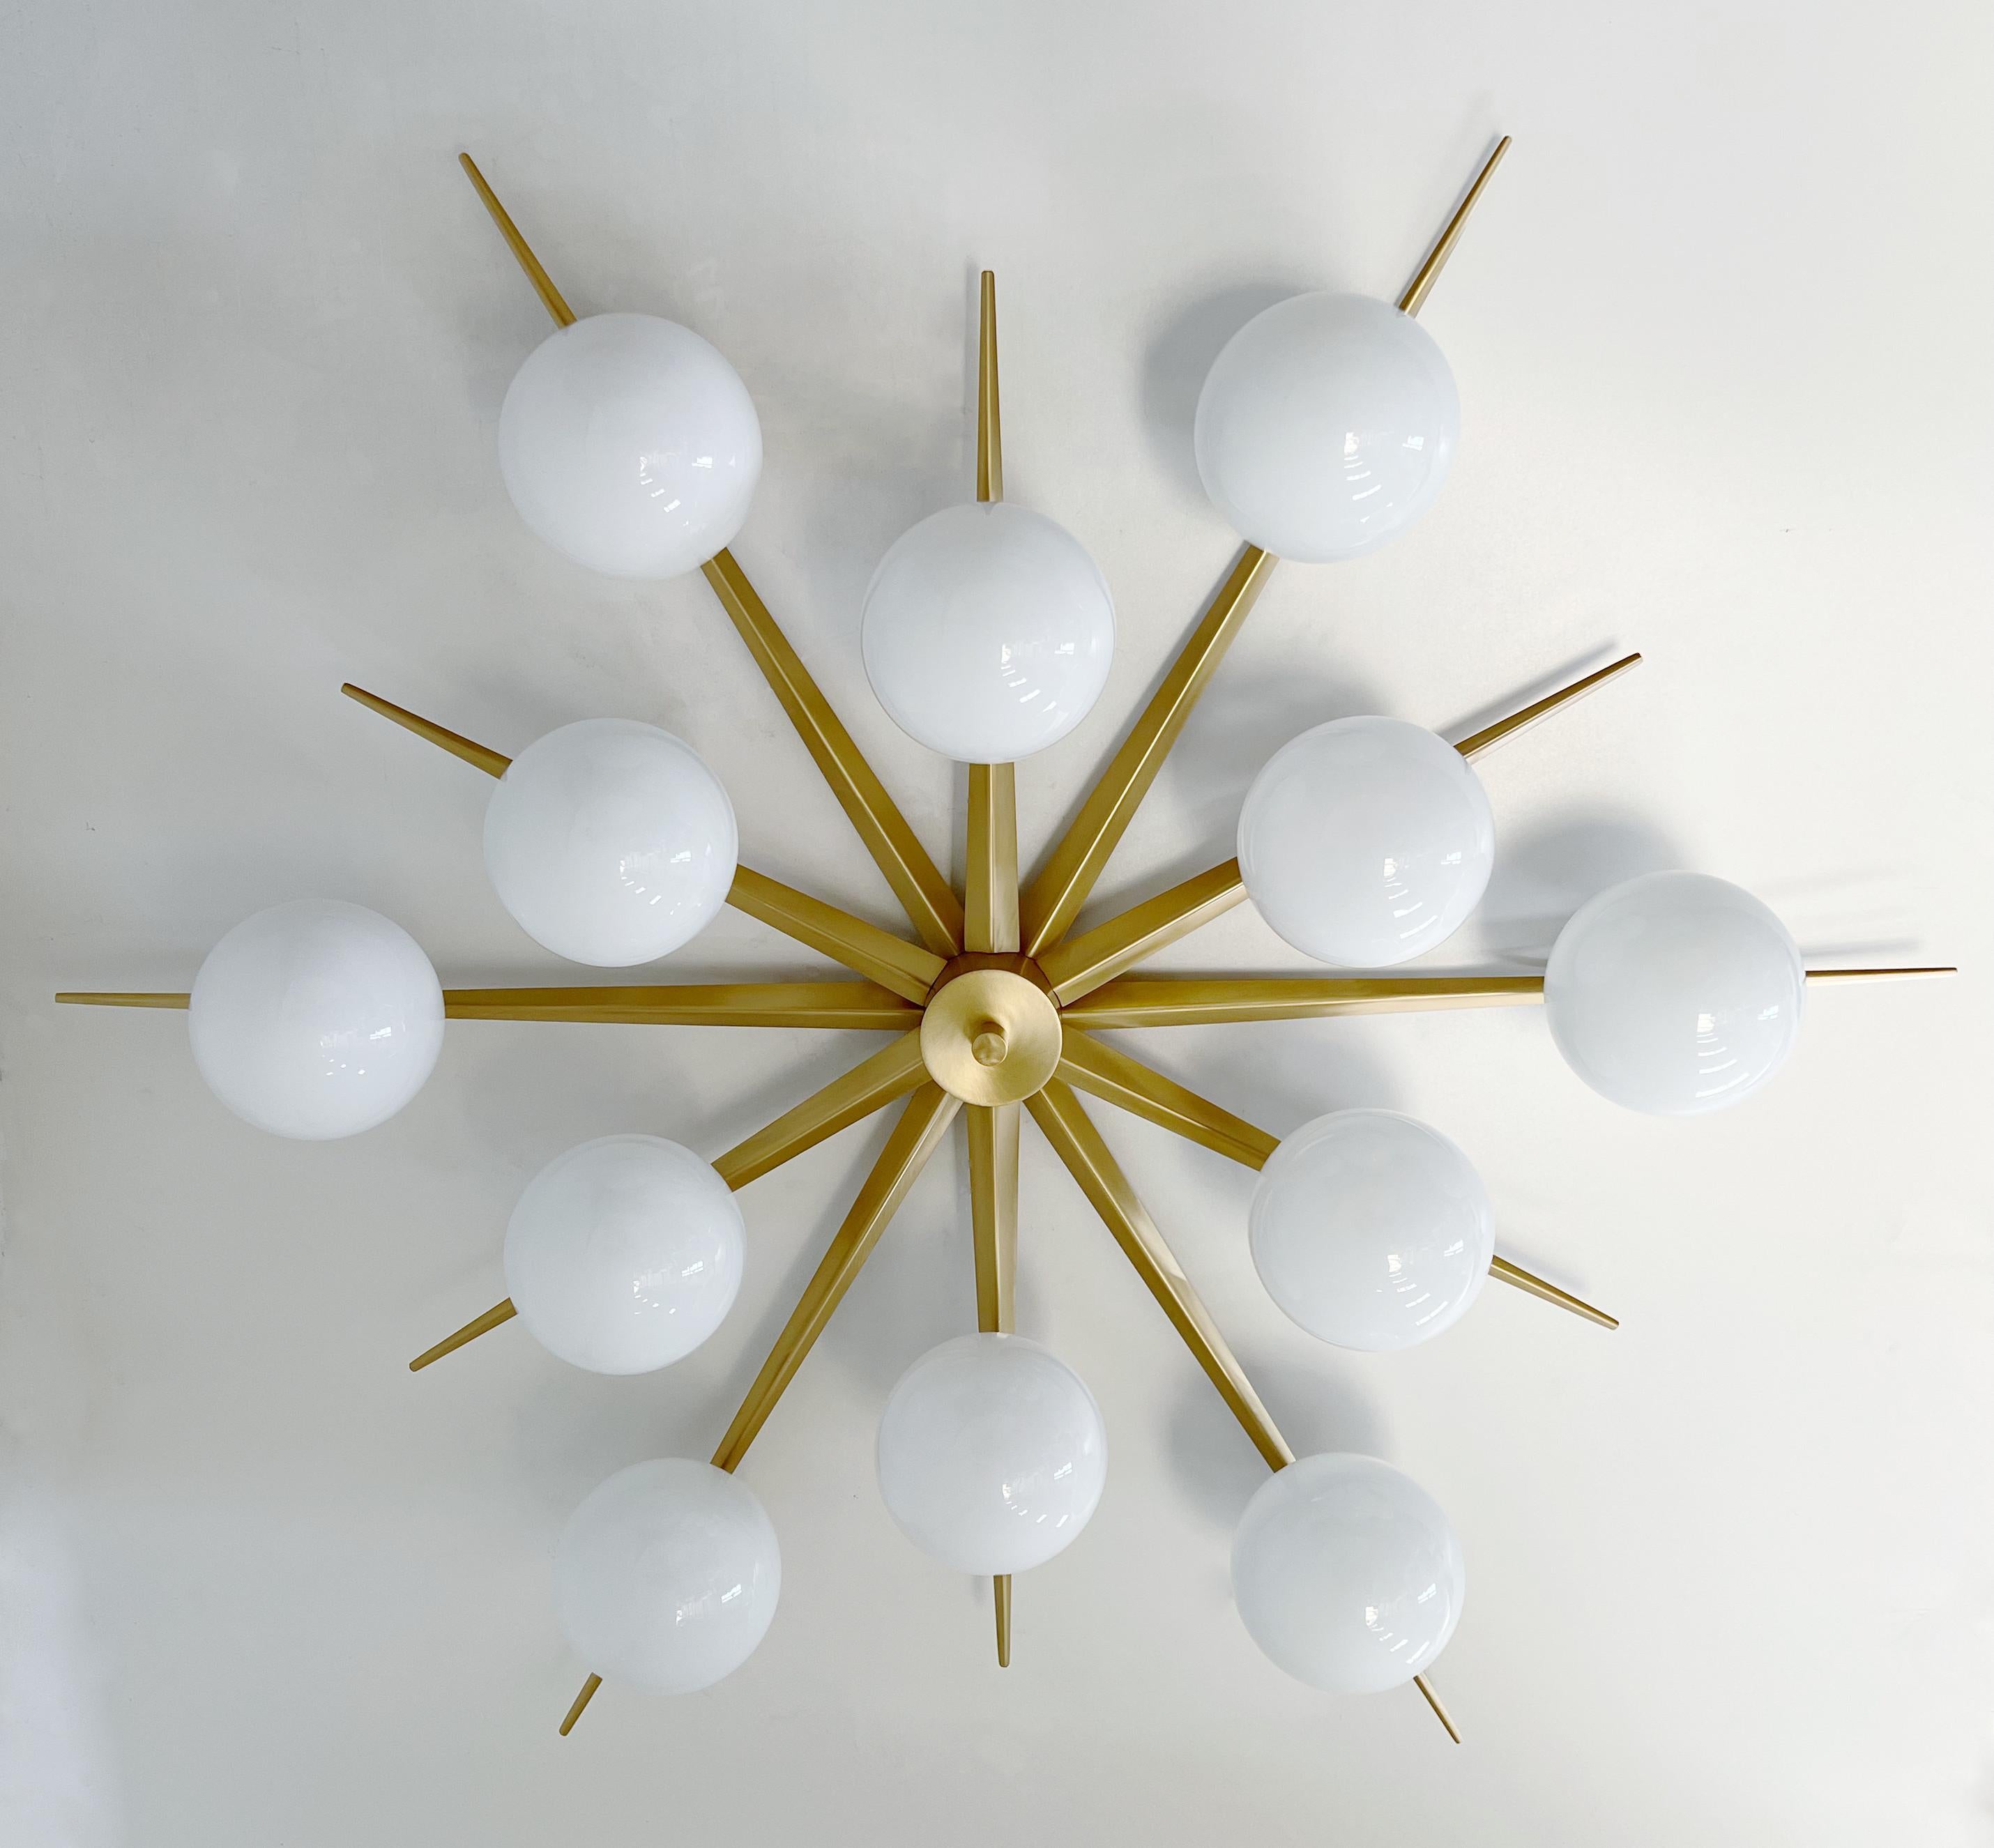 Italian flush mount with 12 large Murano glass globes mounted on brass frame / Made in Italy
Designed by Fabio Ltd, inspired by Angelo Lelli and Arredoluce styles
12 lights / E12 or E14 type / max 40W each
Diameter: 64 inches / Height: 14